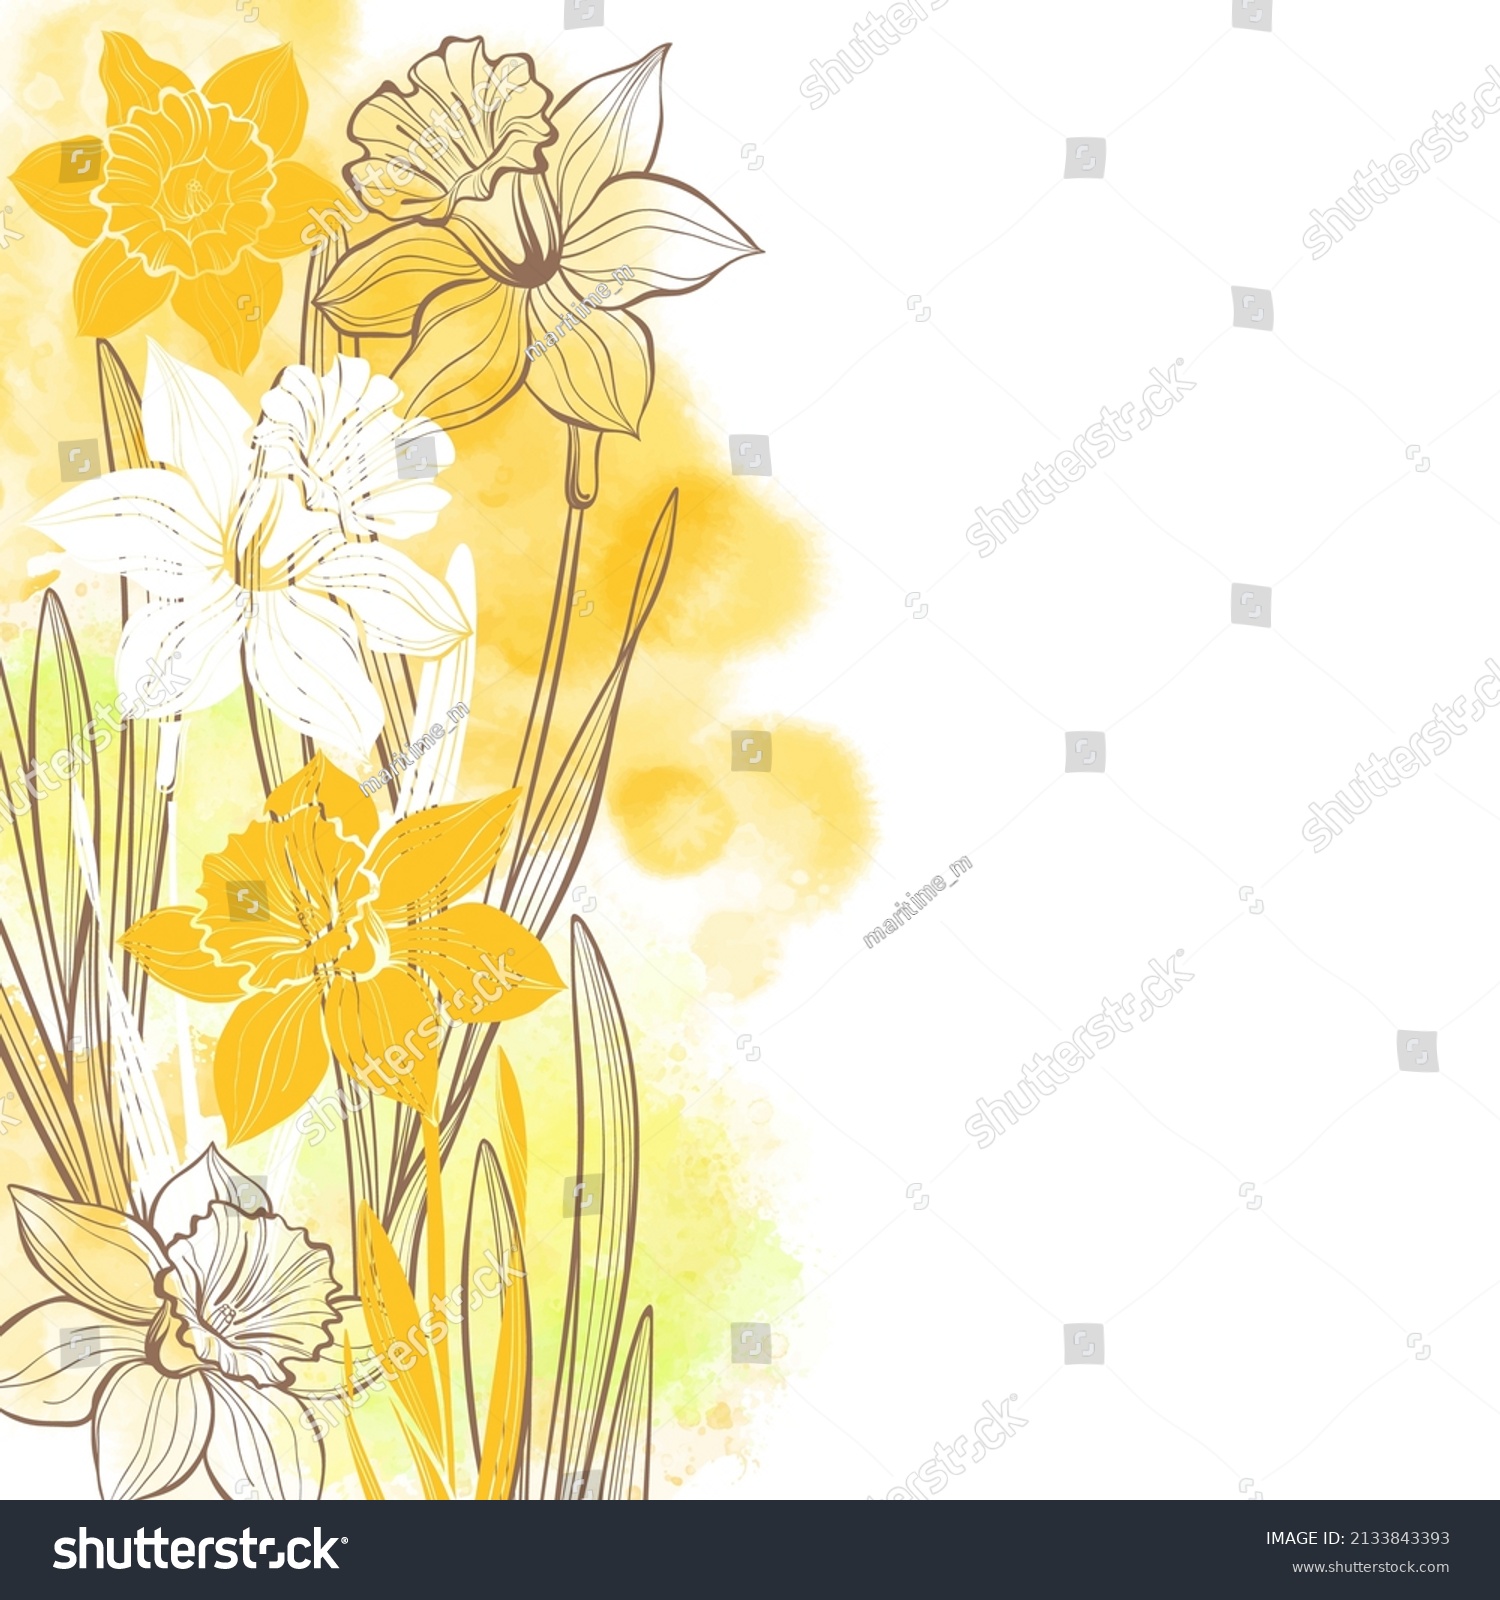 SVG of Floral design with daffodil flowers on a yellow watercolor background. Vector illustration with place for text.  Greeting card, invitation or isolated elements for design. Vertical composition. svg